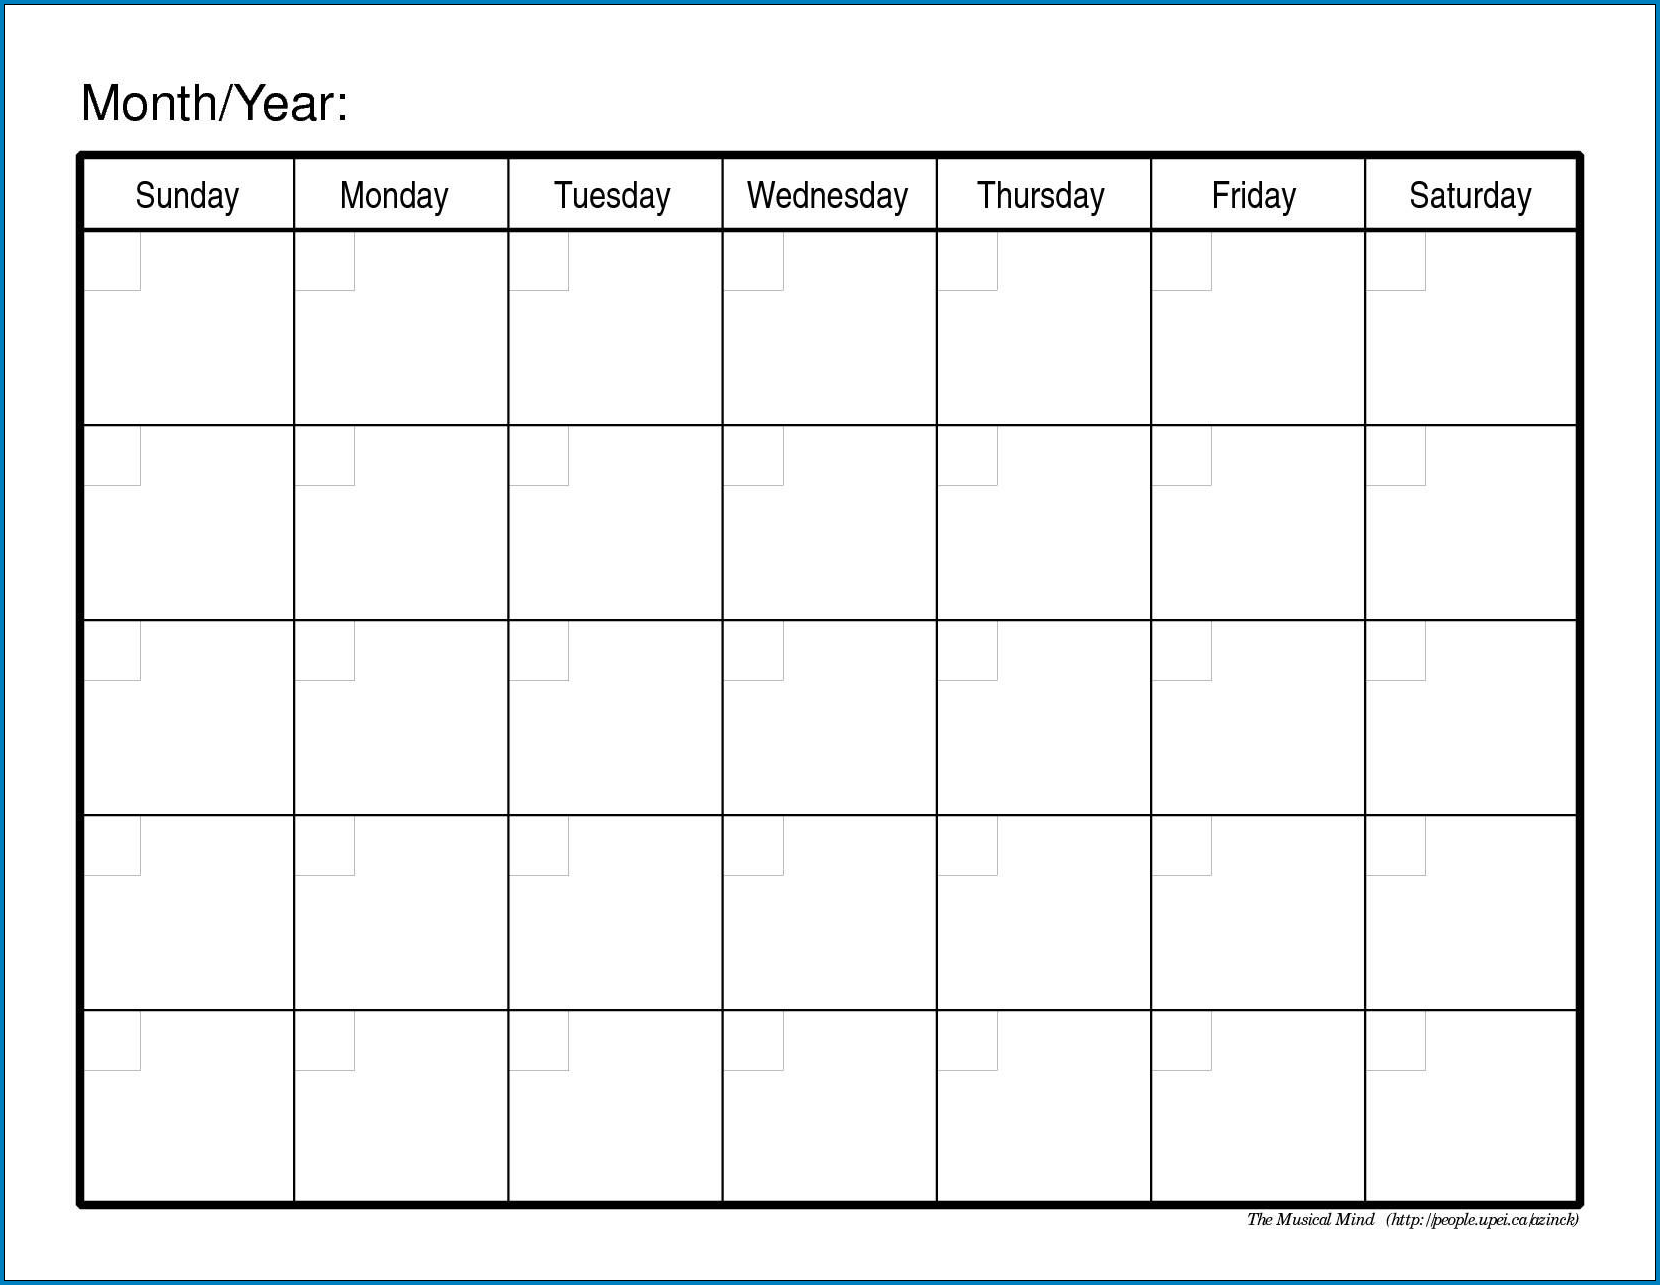 Sample of Monthly Calendar Template